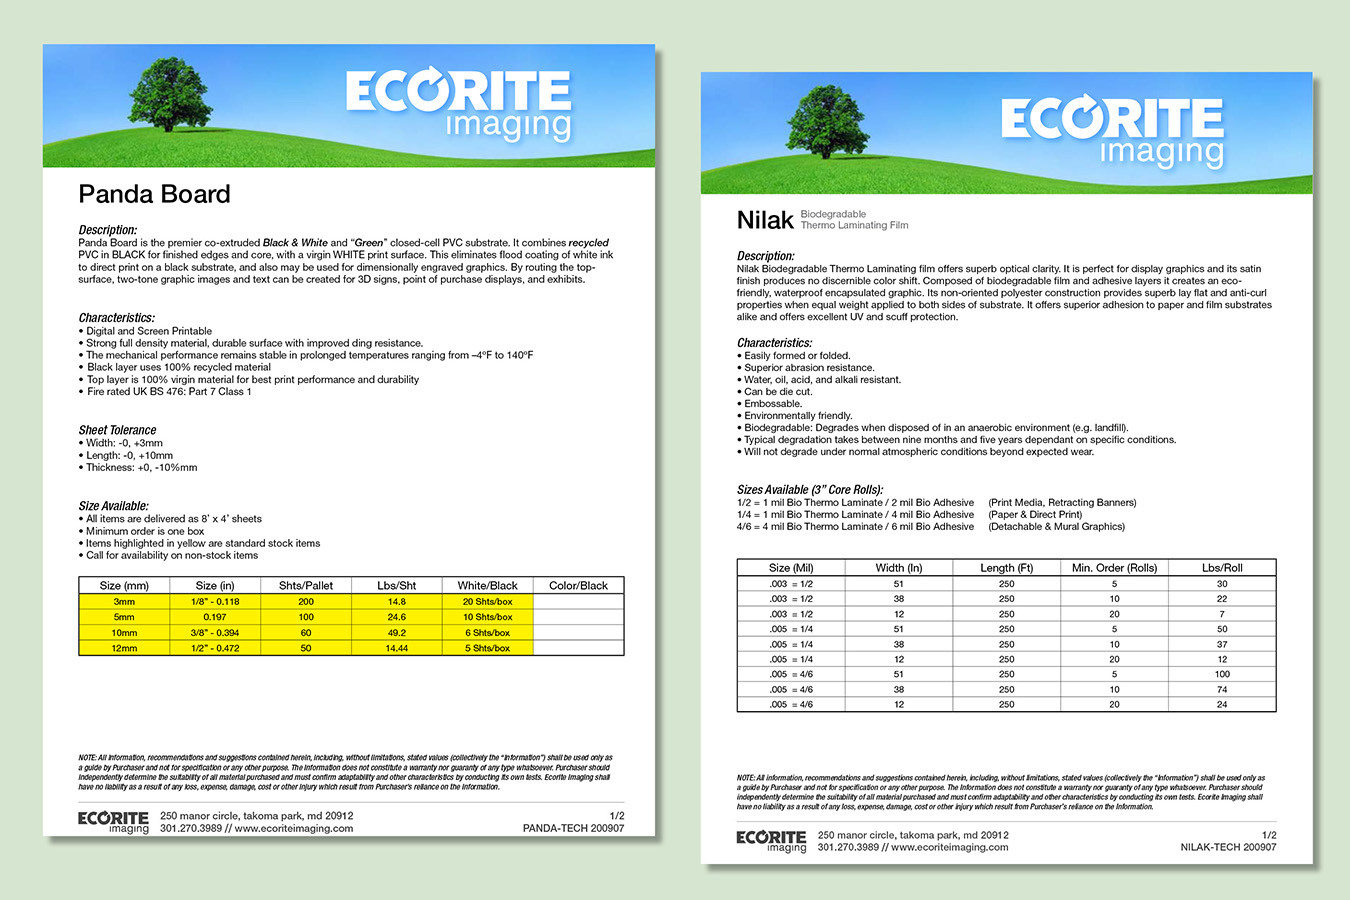 ecorite 13 : Spec sheets for Panda Board (B&W co-extruded recycled PVC) & Nilak (Bio thermal laminate)